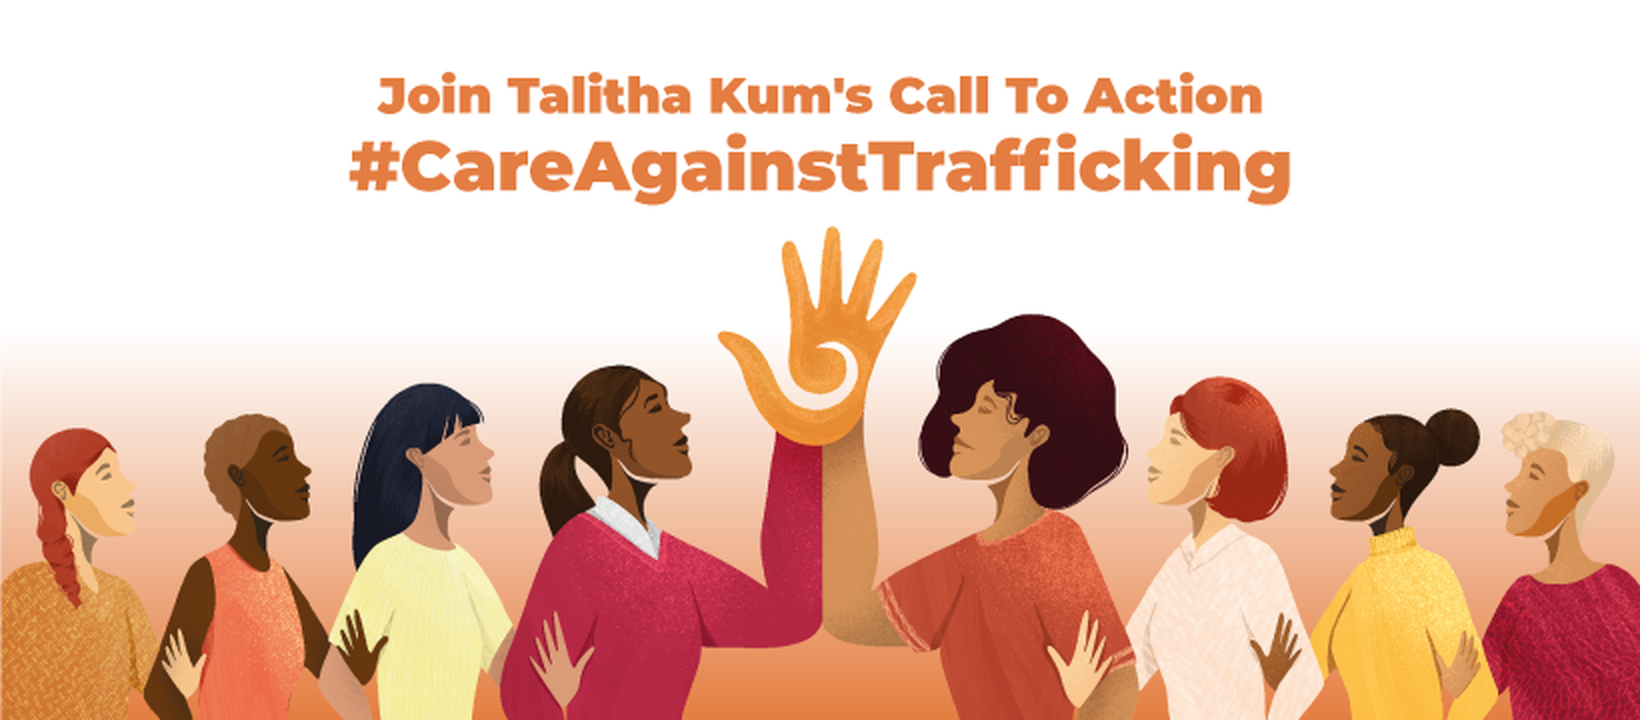 November 25th 2021, - Launch of Talitha Kum’s Call To Action